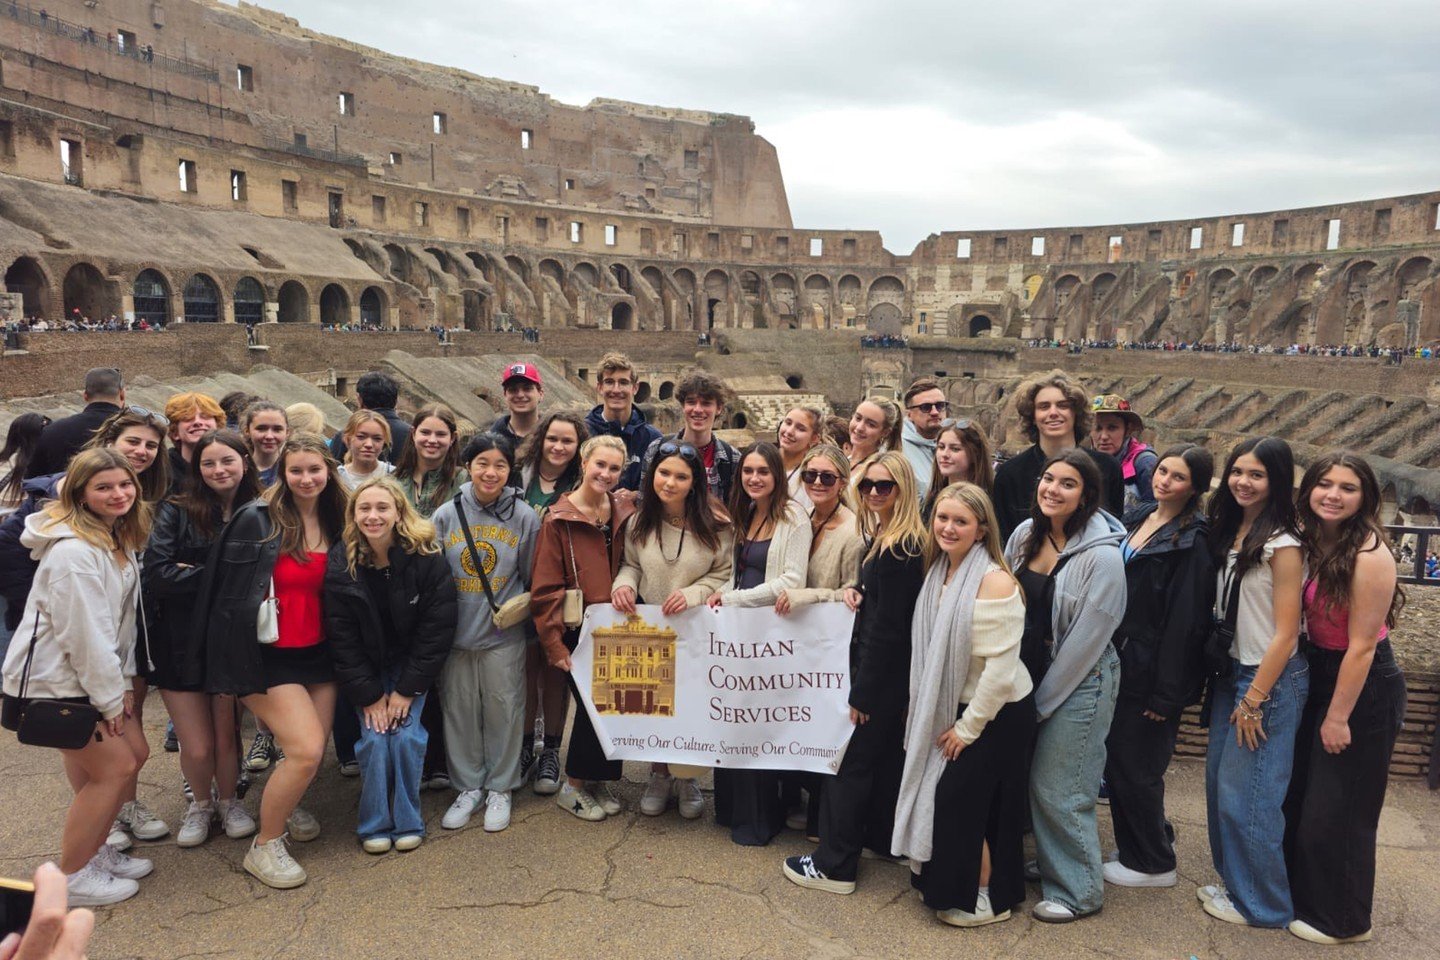 The recent educational trip taken by students from the Burlingame High School Italian class to Italy was made possible thanks to the support of the ICS 2023-2024 John C. Riccio Grant. Burlingame High School is among the 8 schools that received this g